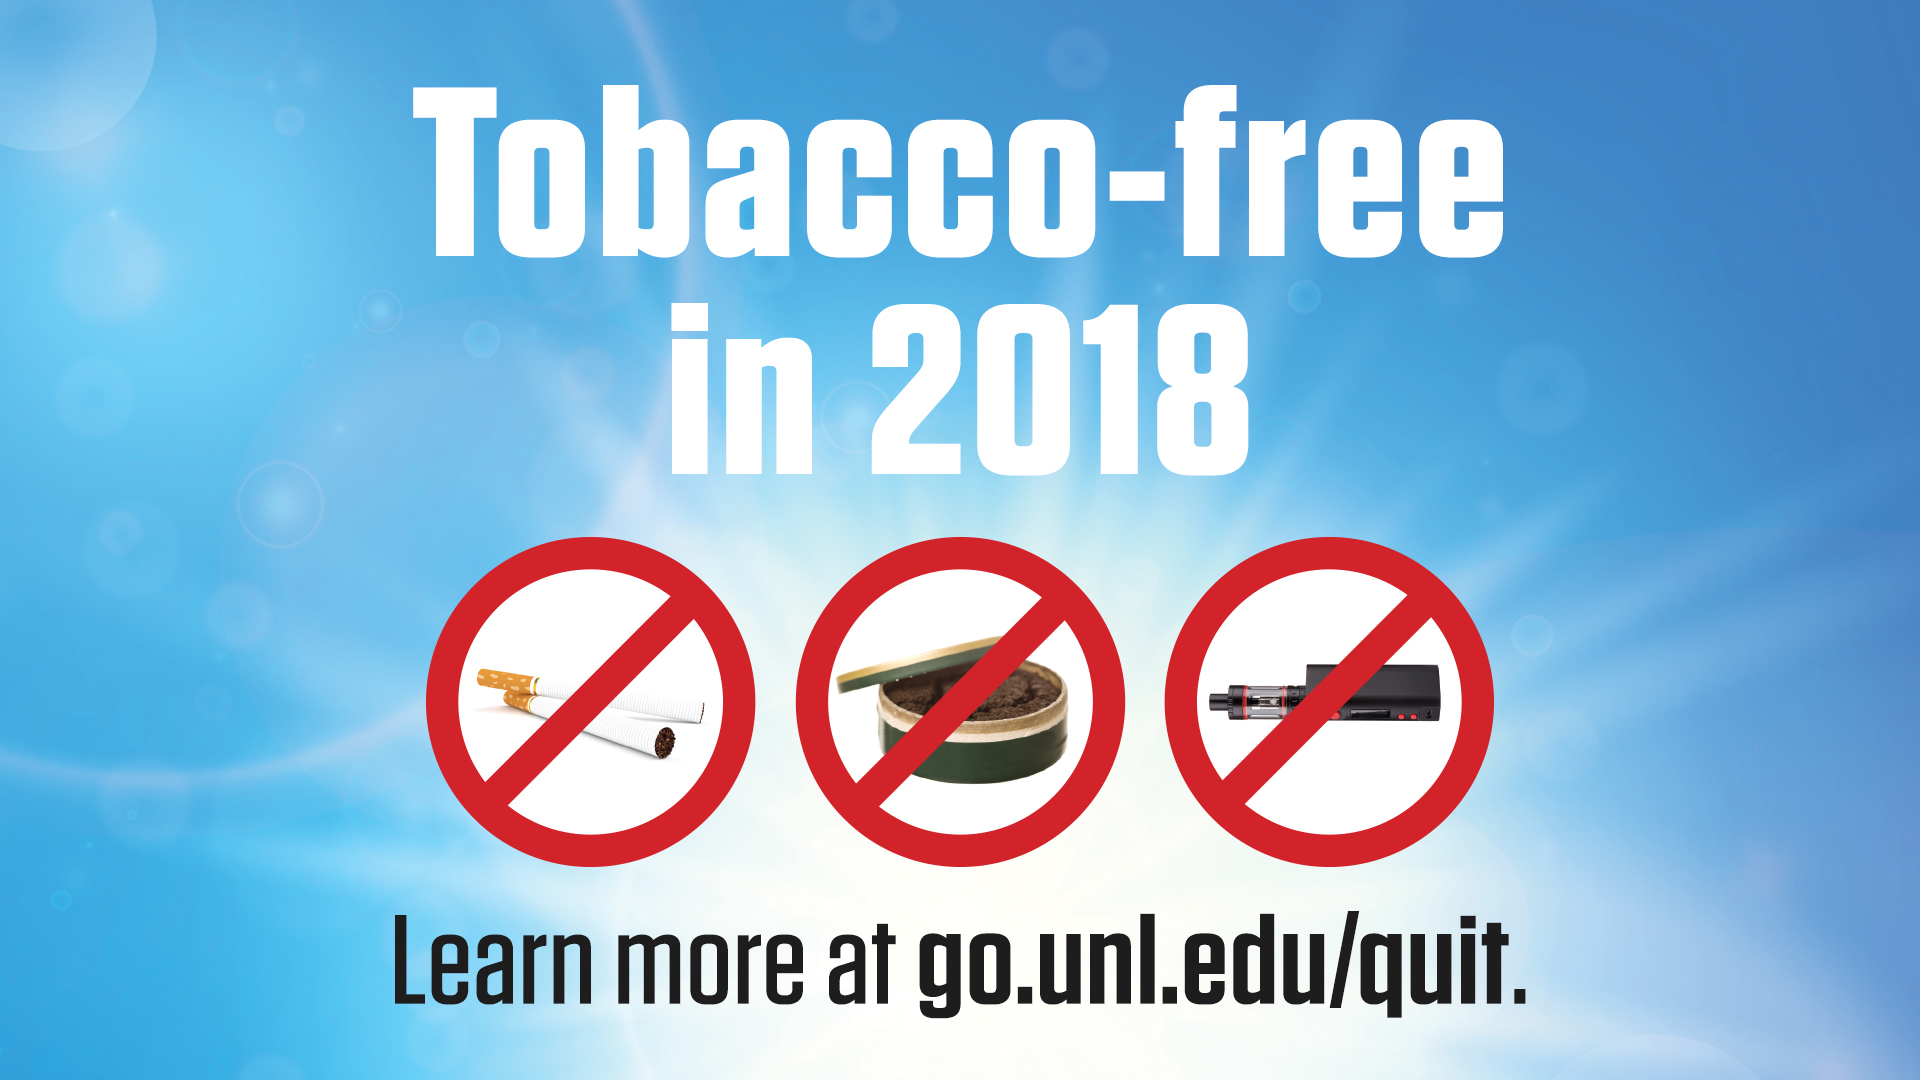 Tobacco-free in 2018